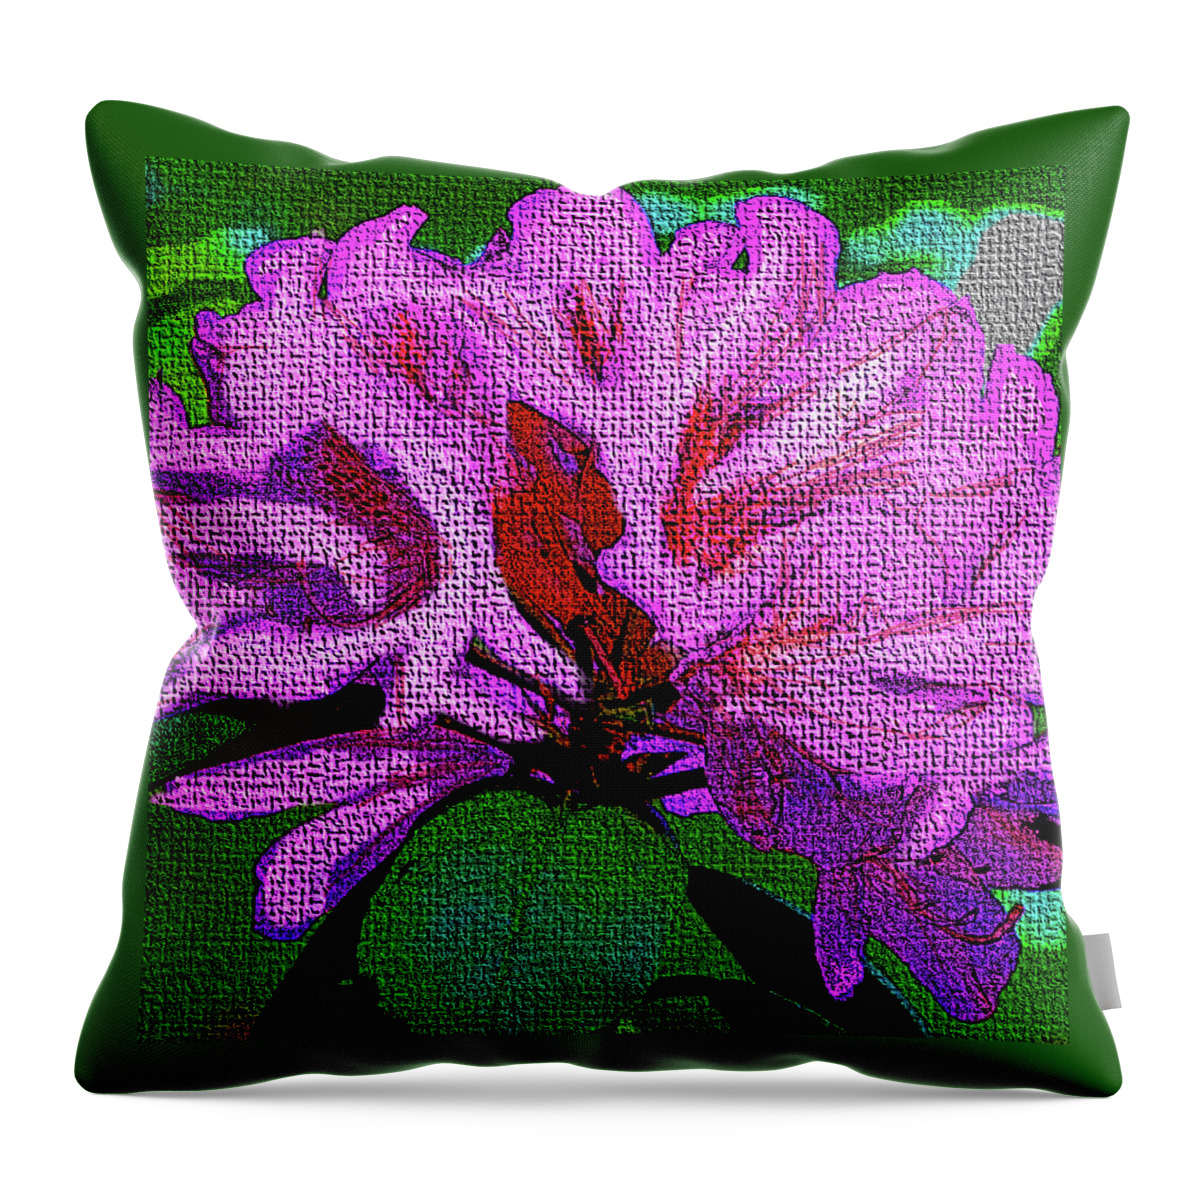 Flowers Throw Pillow featuring the digital art Violet Azalea by Rod Whyte